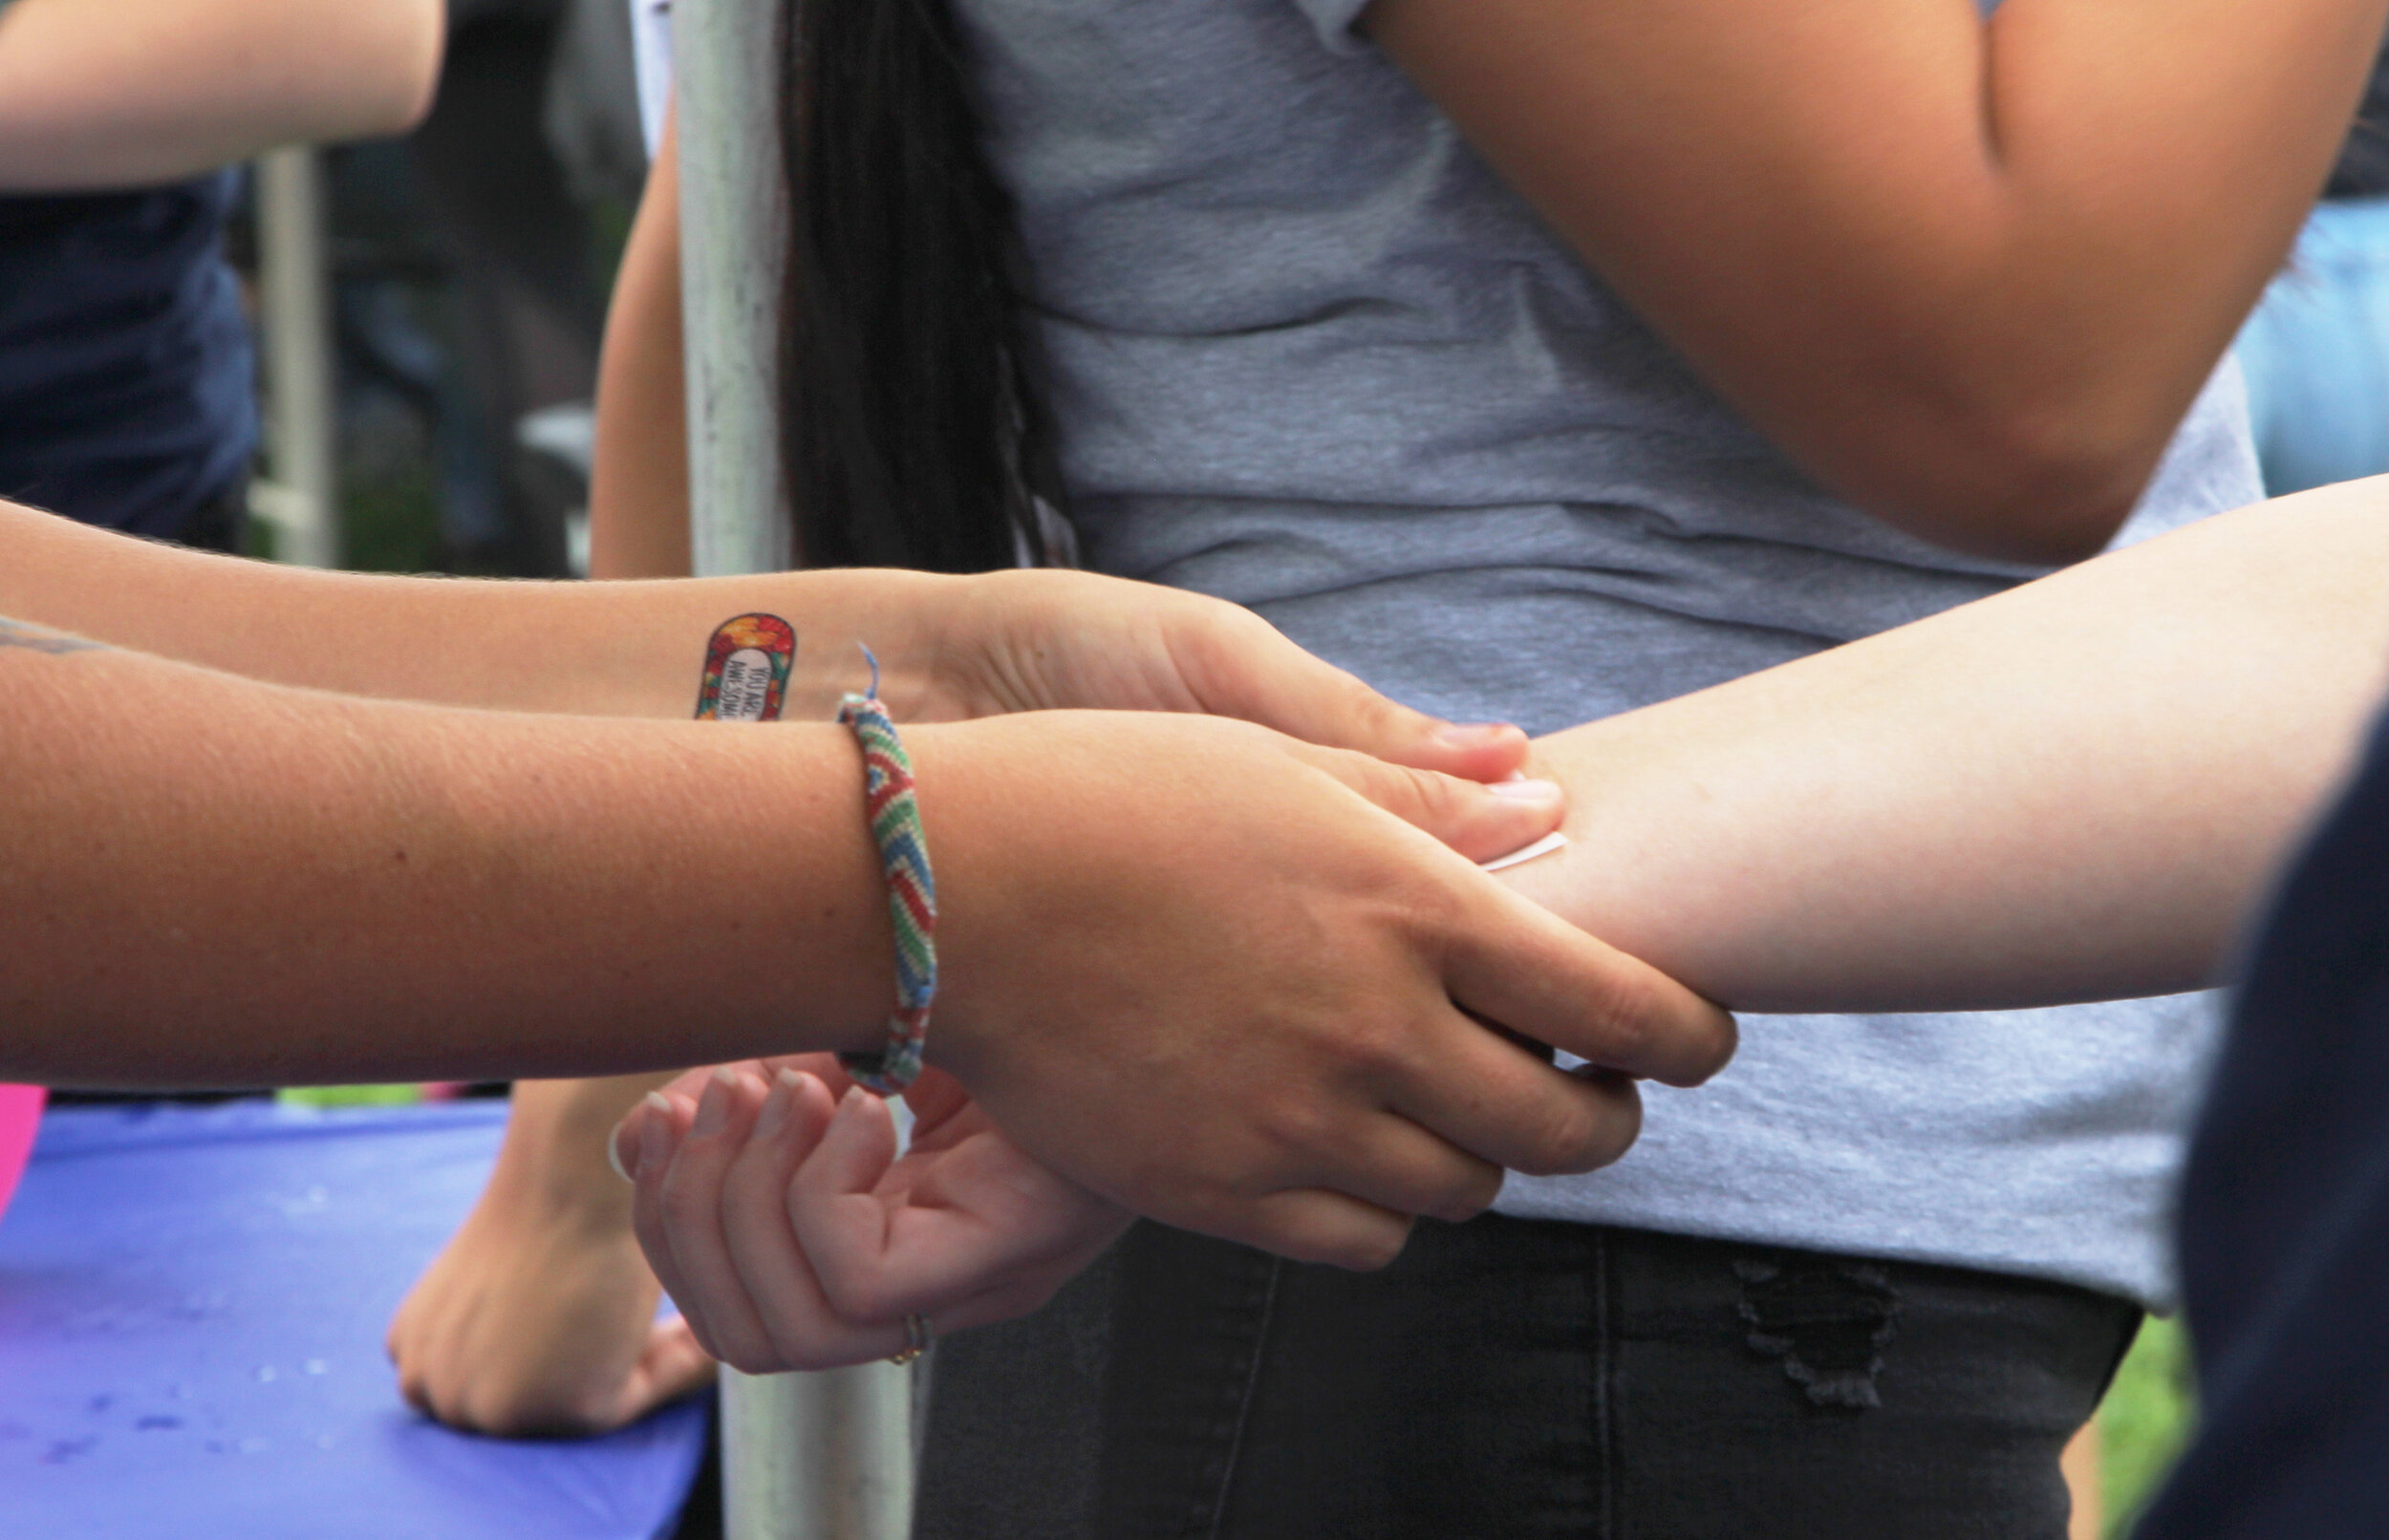  Volunteer wearing a temporary tattoo on the wrist giving the same tattoo to participants. 